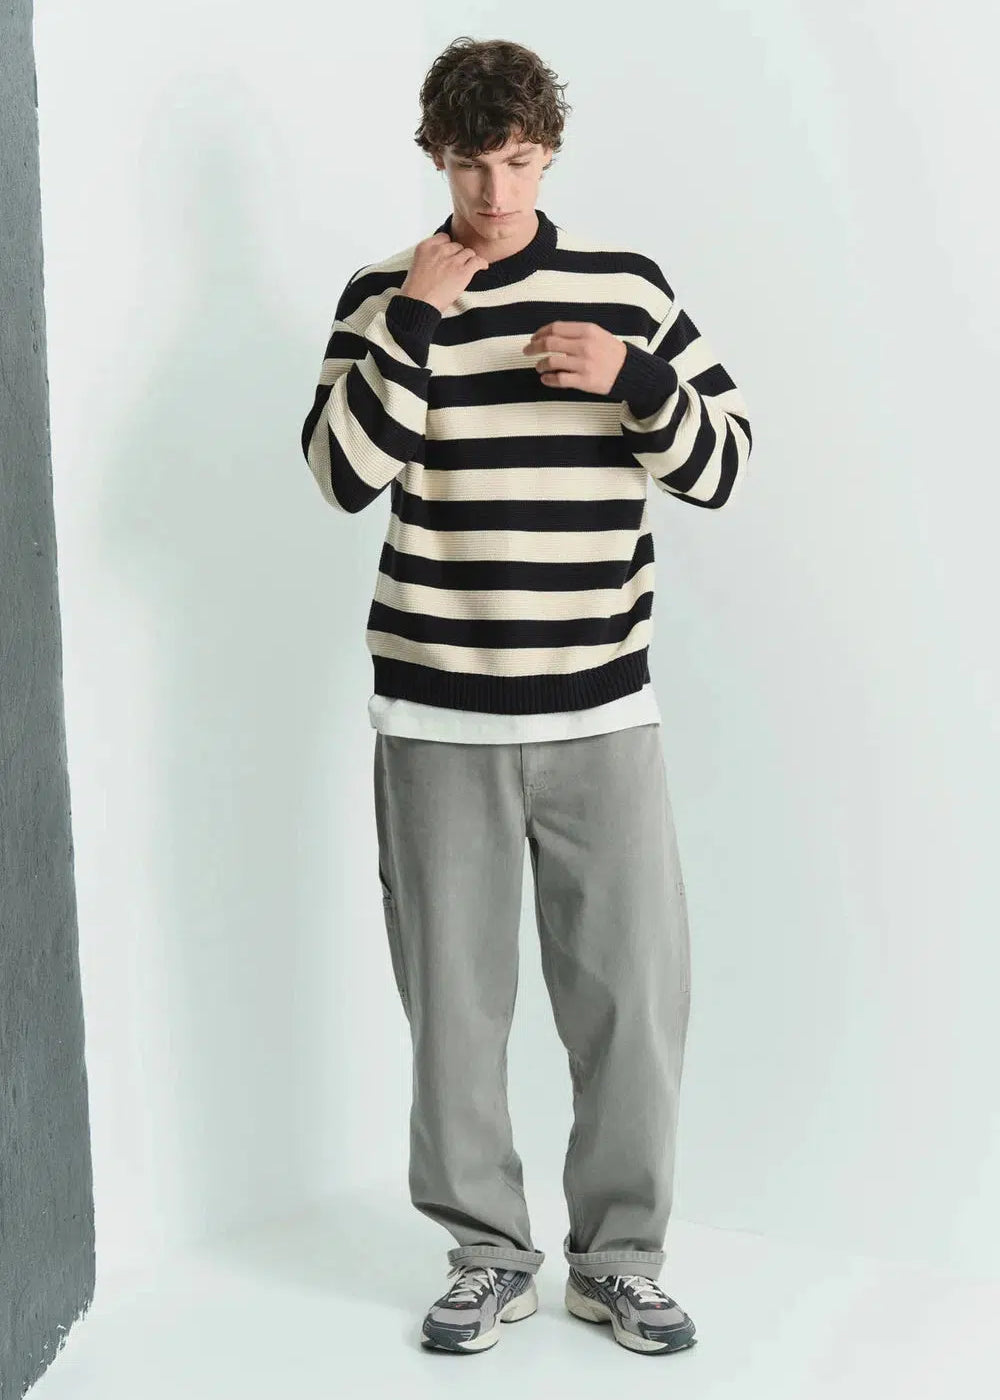 Commoners Oversized Knit Jumper - Stripe | COMMONERS | Mad About The Boy